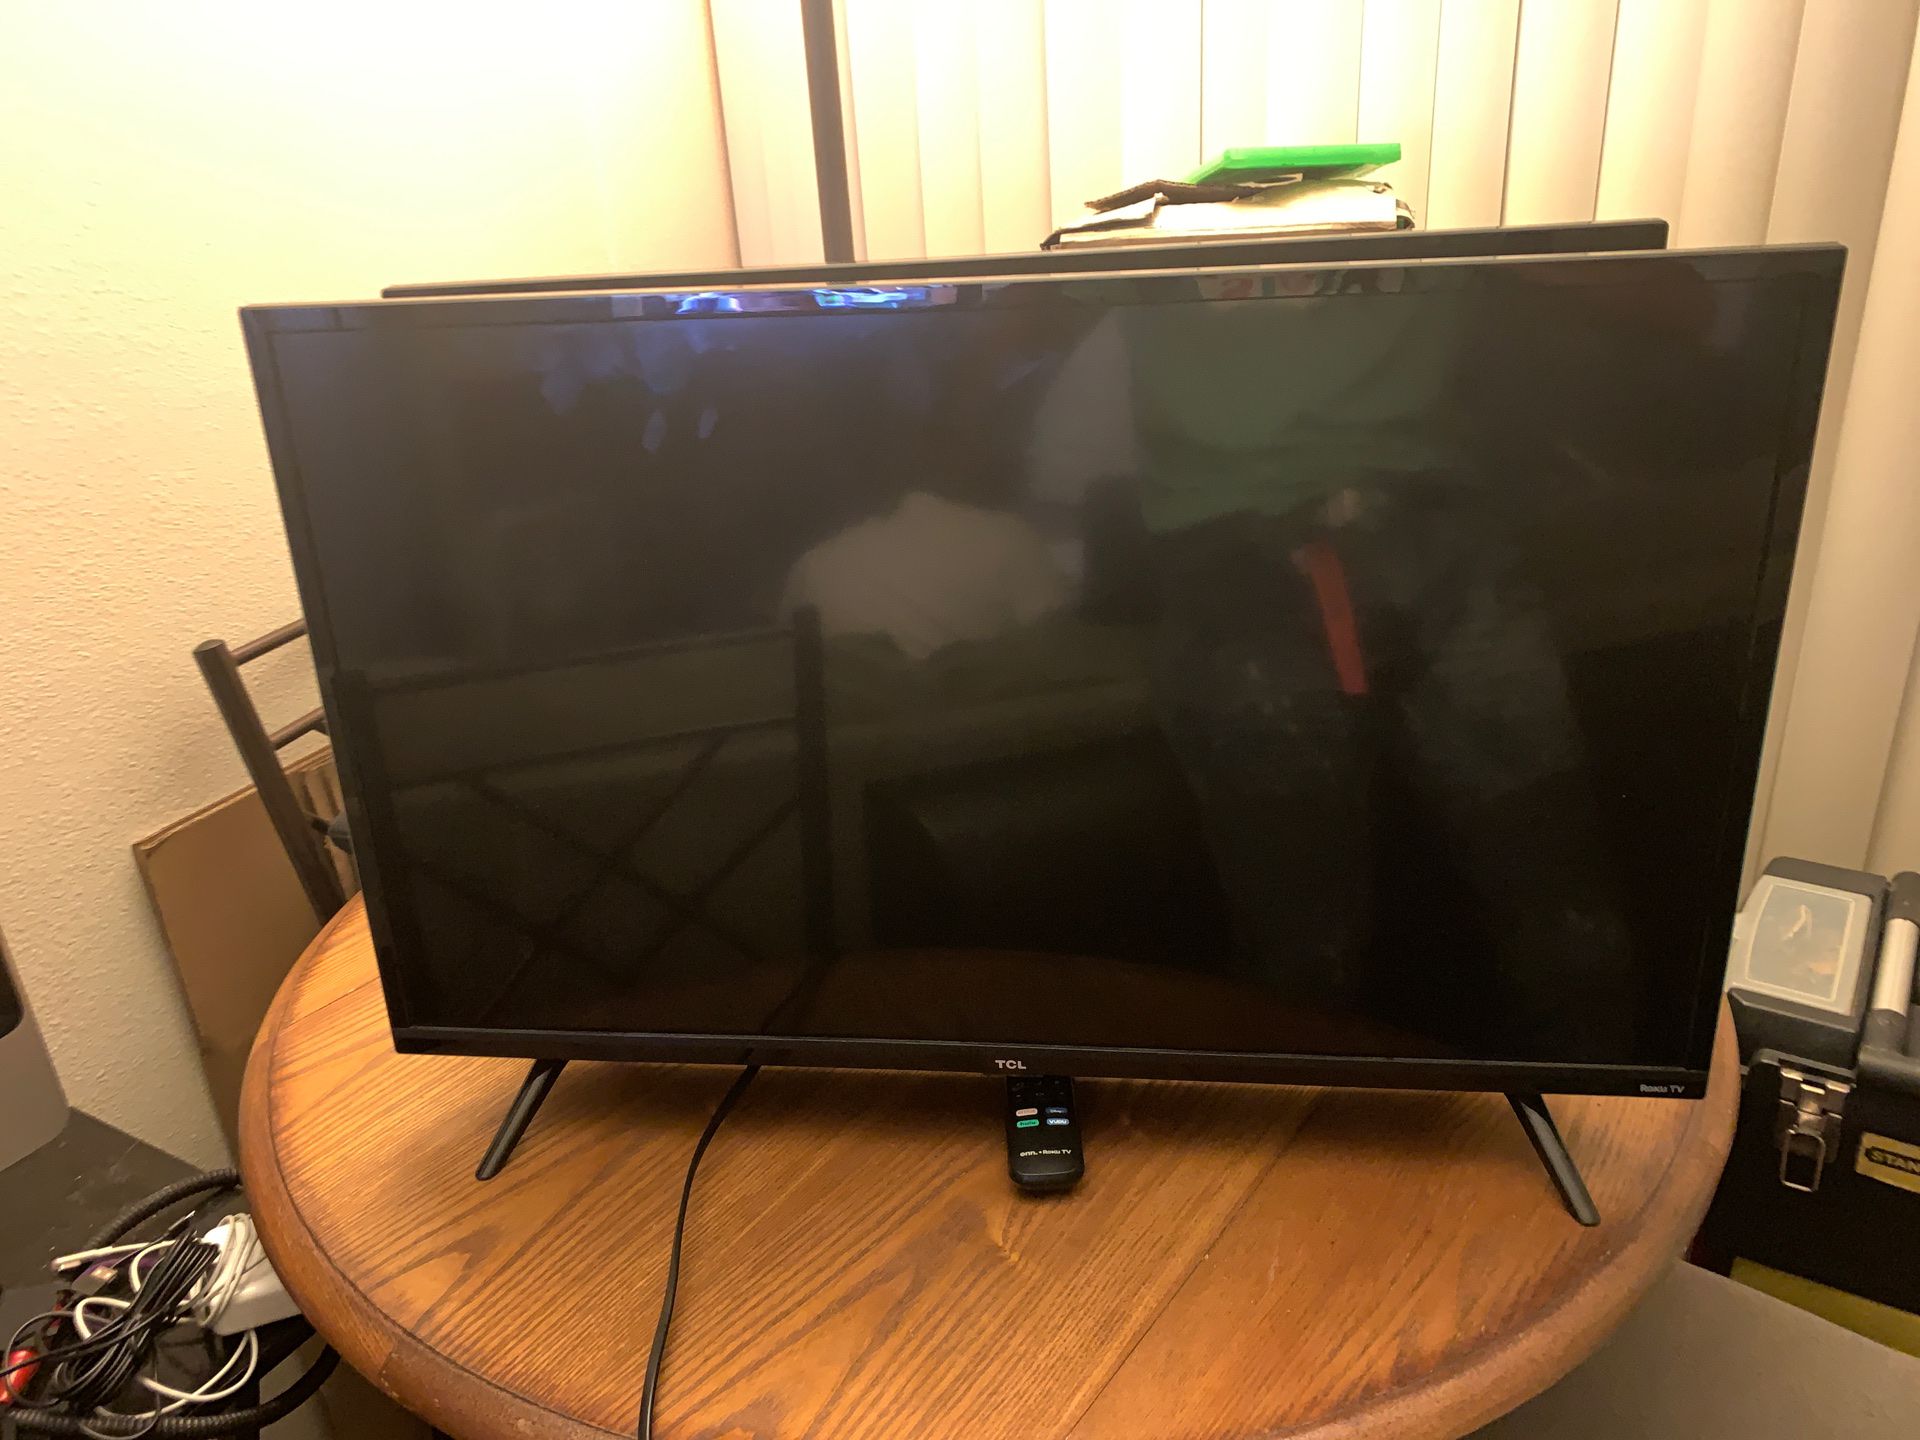 TCL Roku smart TV 32” for sale asking for $115.00 or your best offer